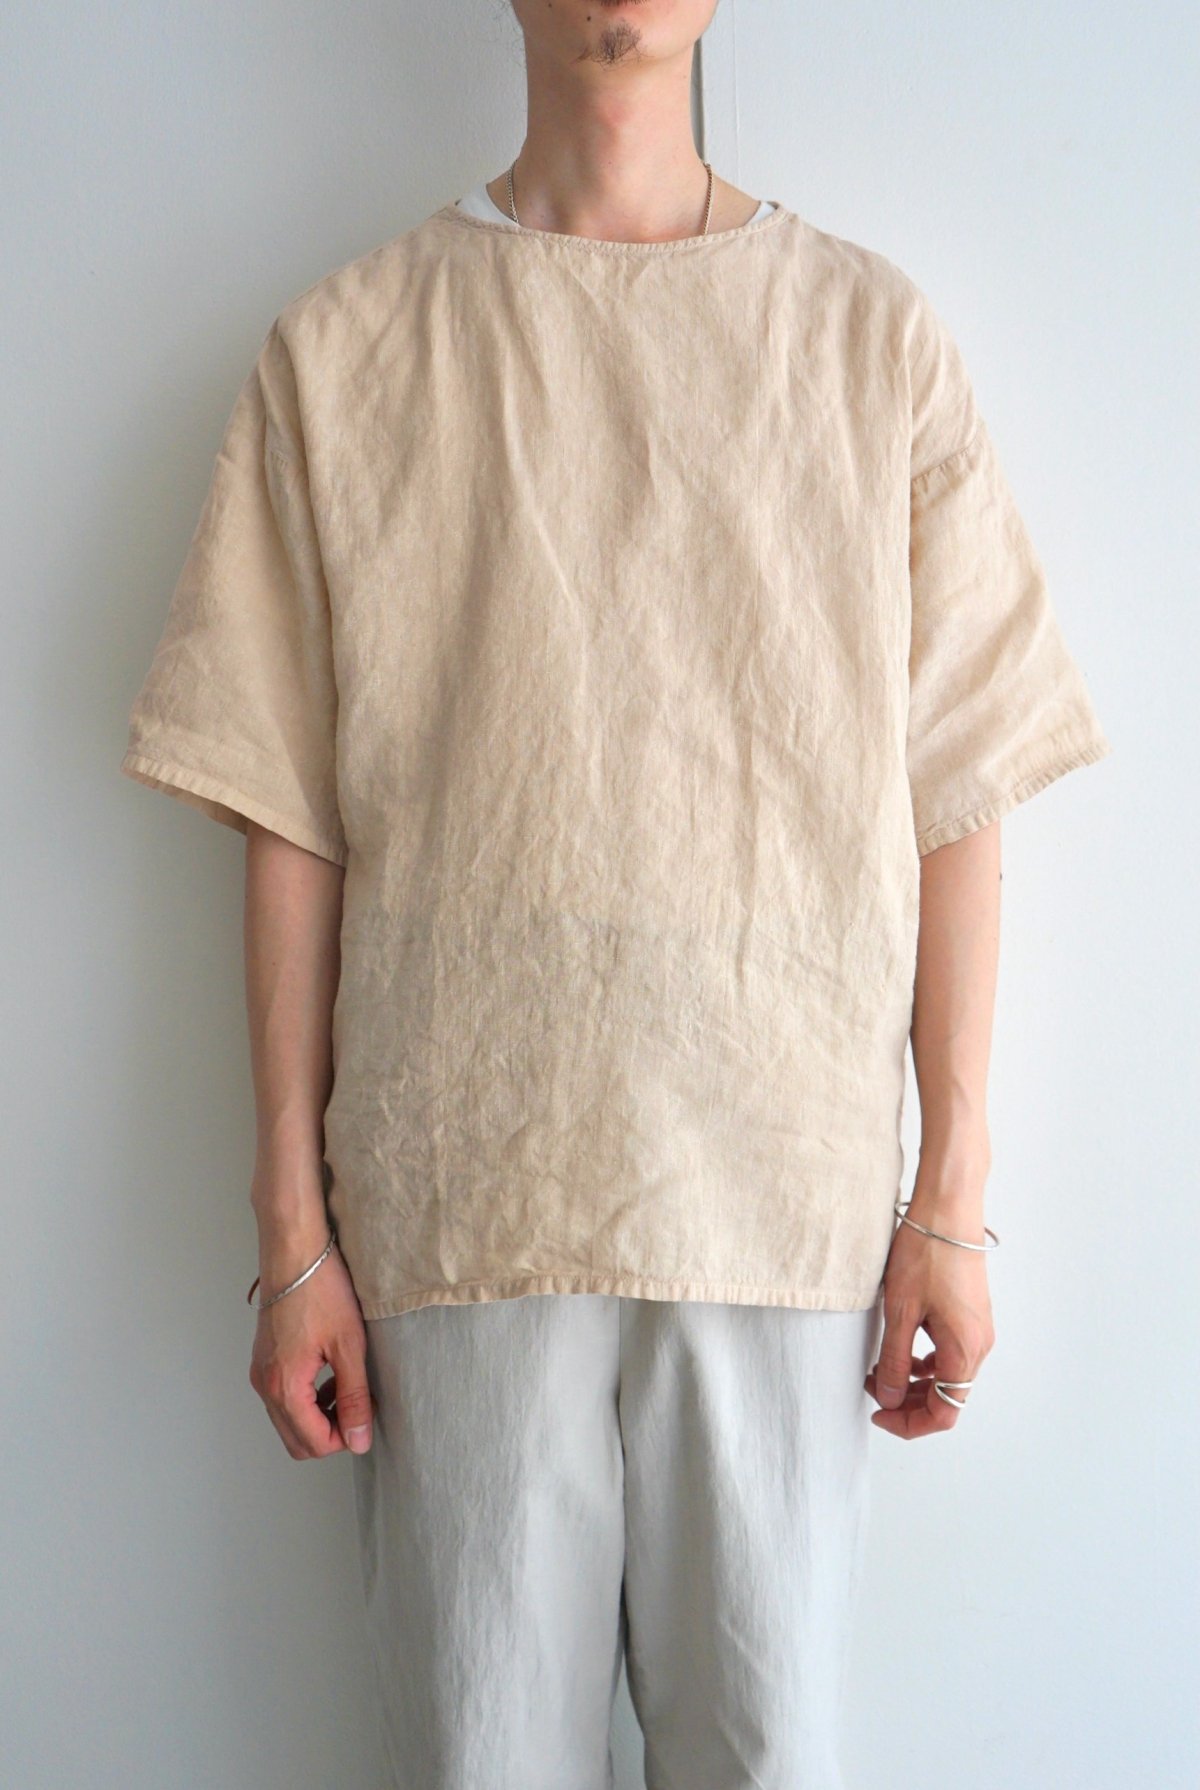 COSMIC WONDER / Old. floral patterned linen t-shirt / BEESWAX